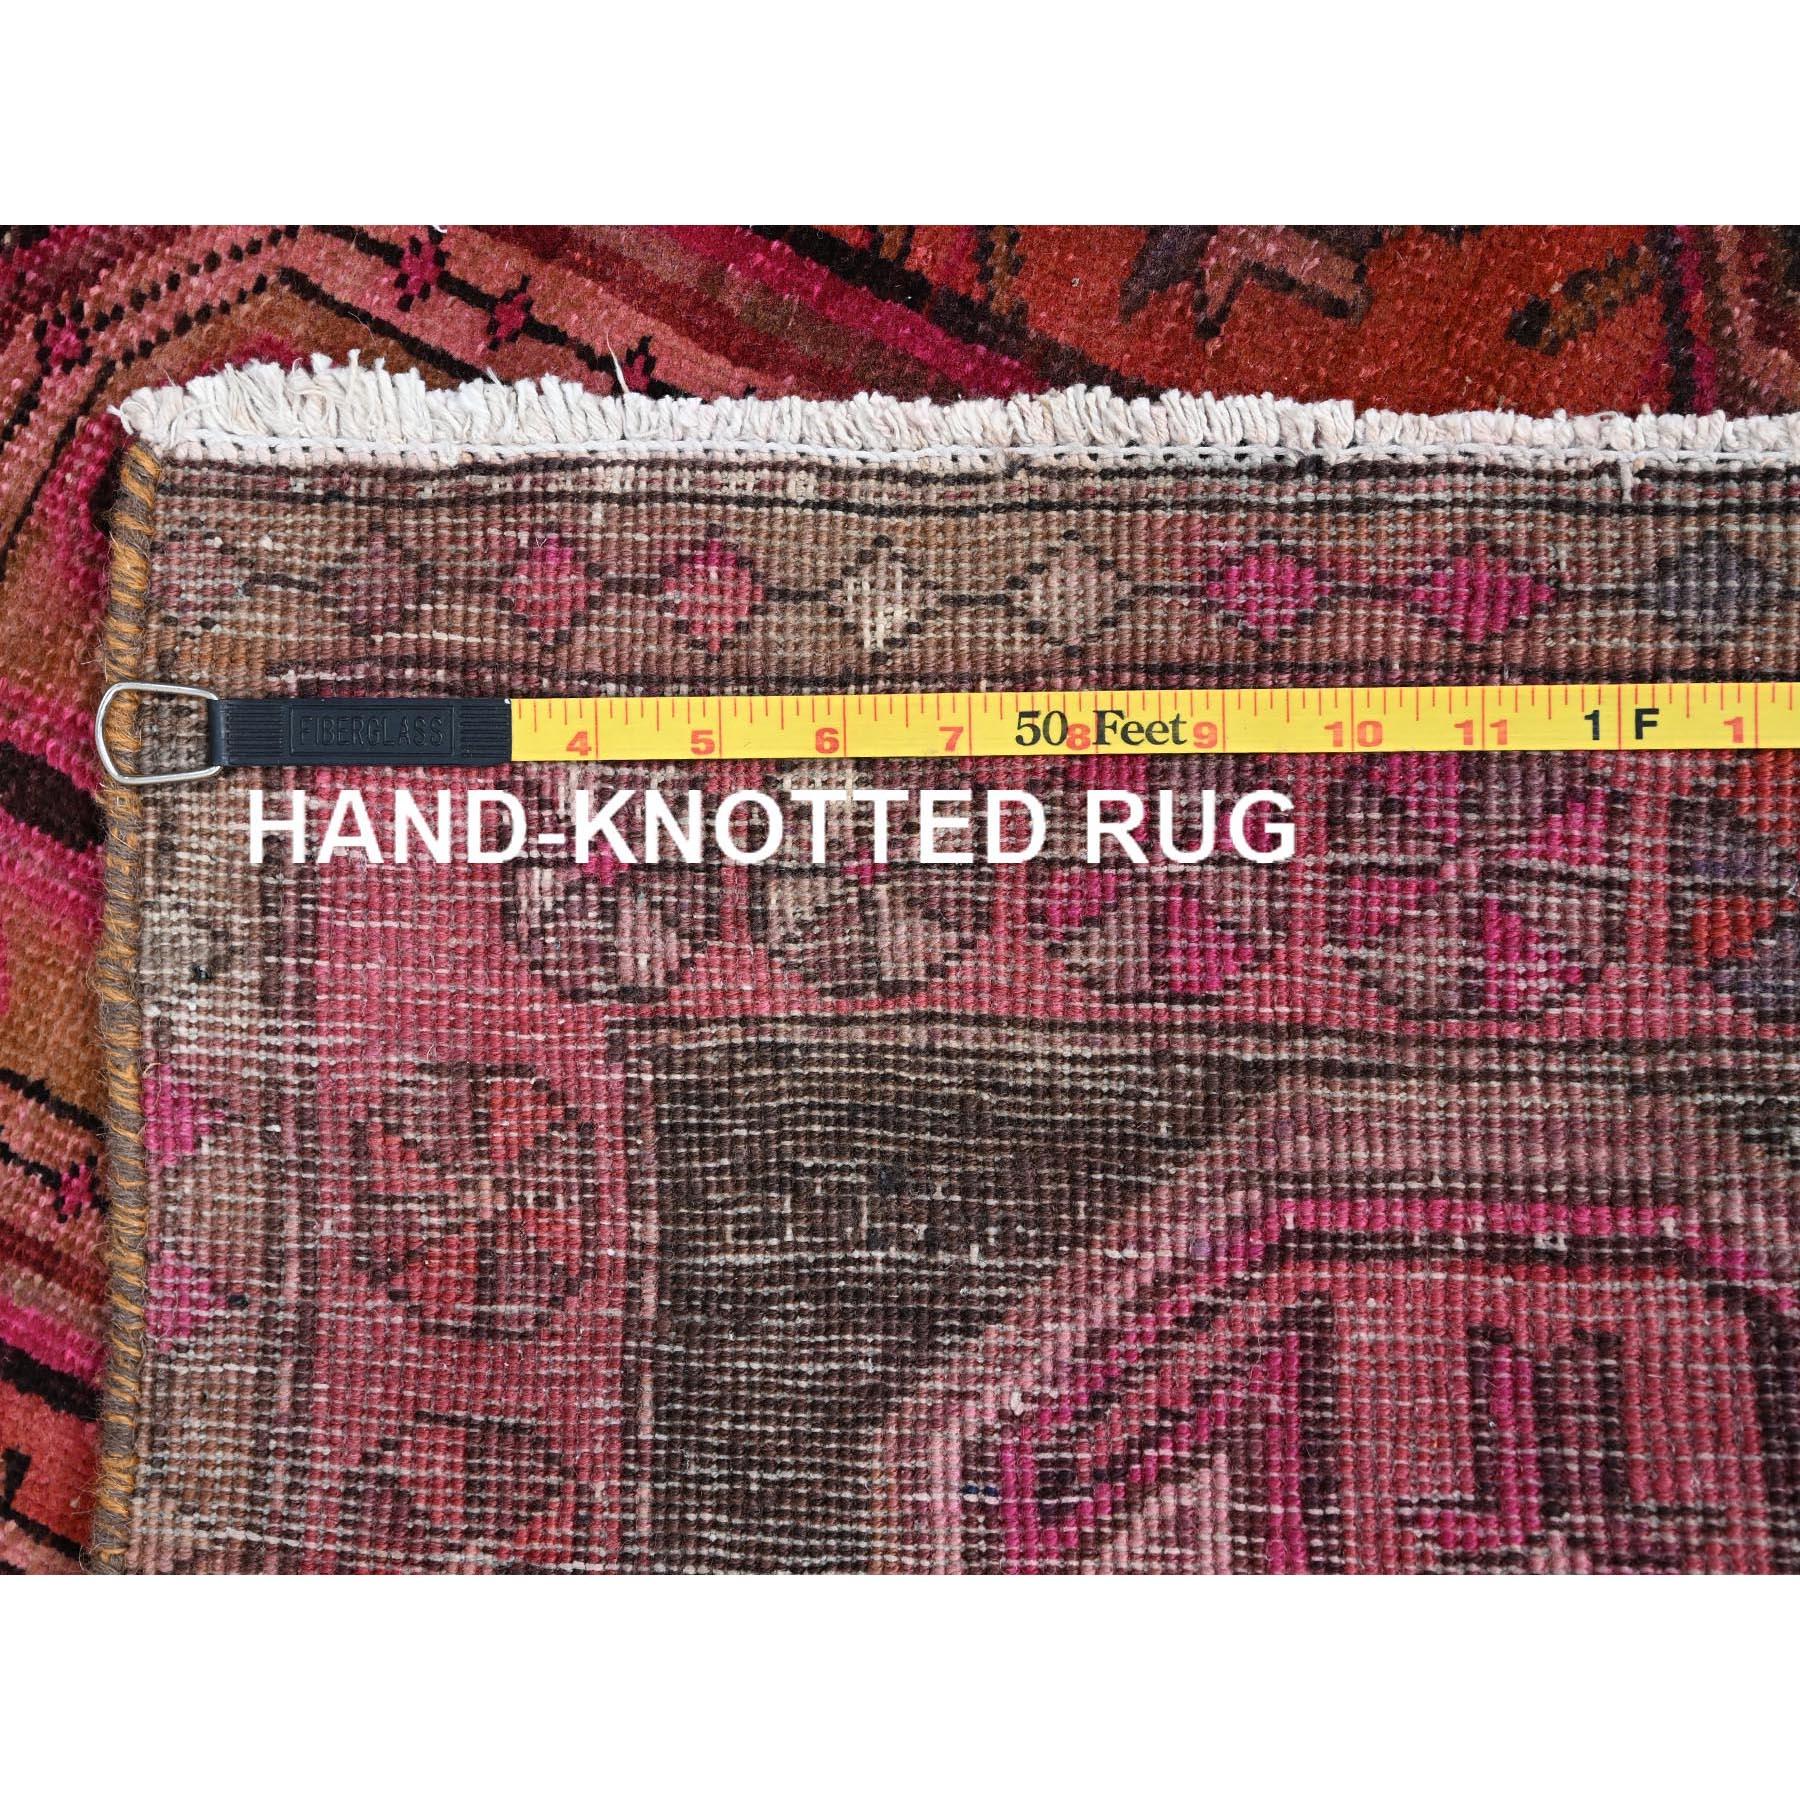 This fabulous Hand-Knotted carpet has been created and designed for extra strength and durability. This rug has been handcrafted for weeks in the traditional method that is used to make
Exact Rug Size in Feet and Inches : 2'10